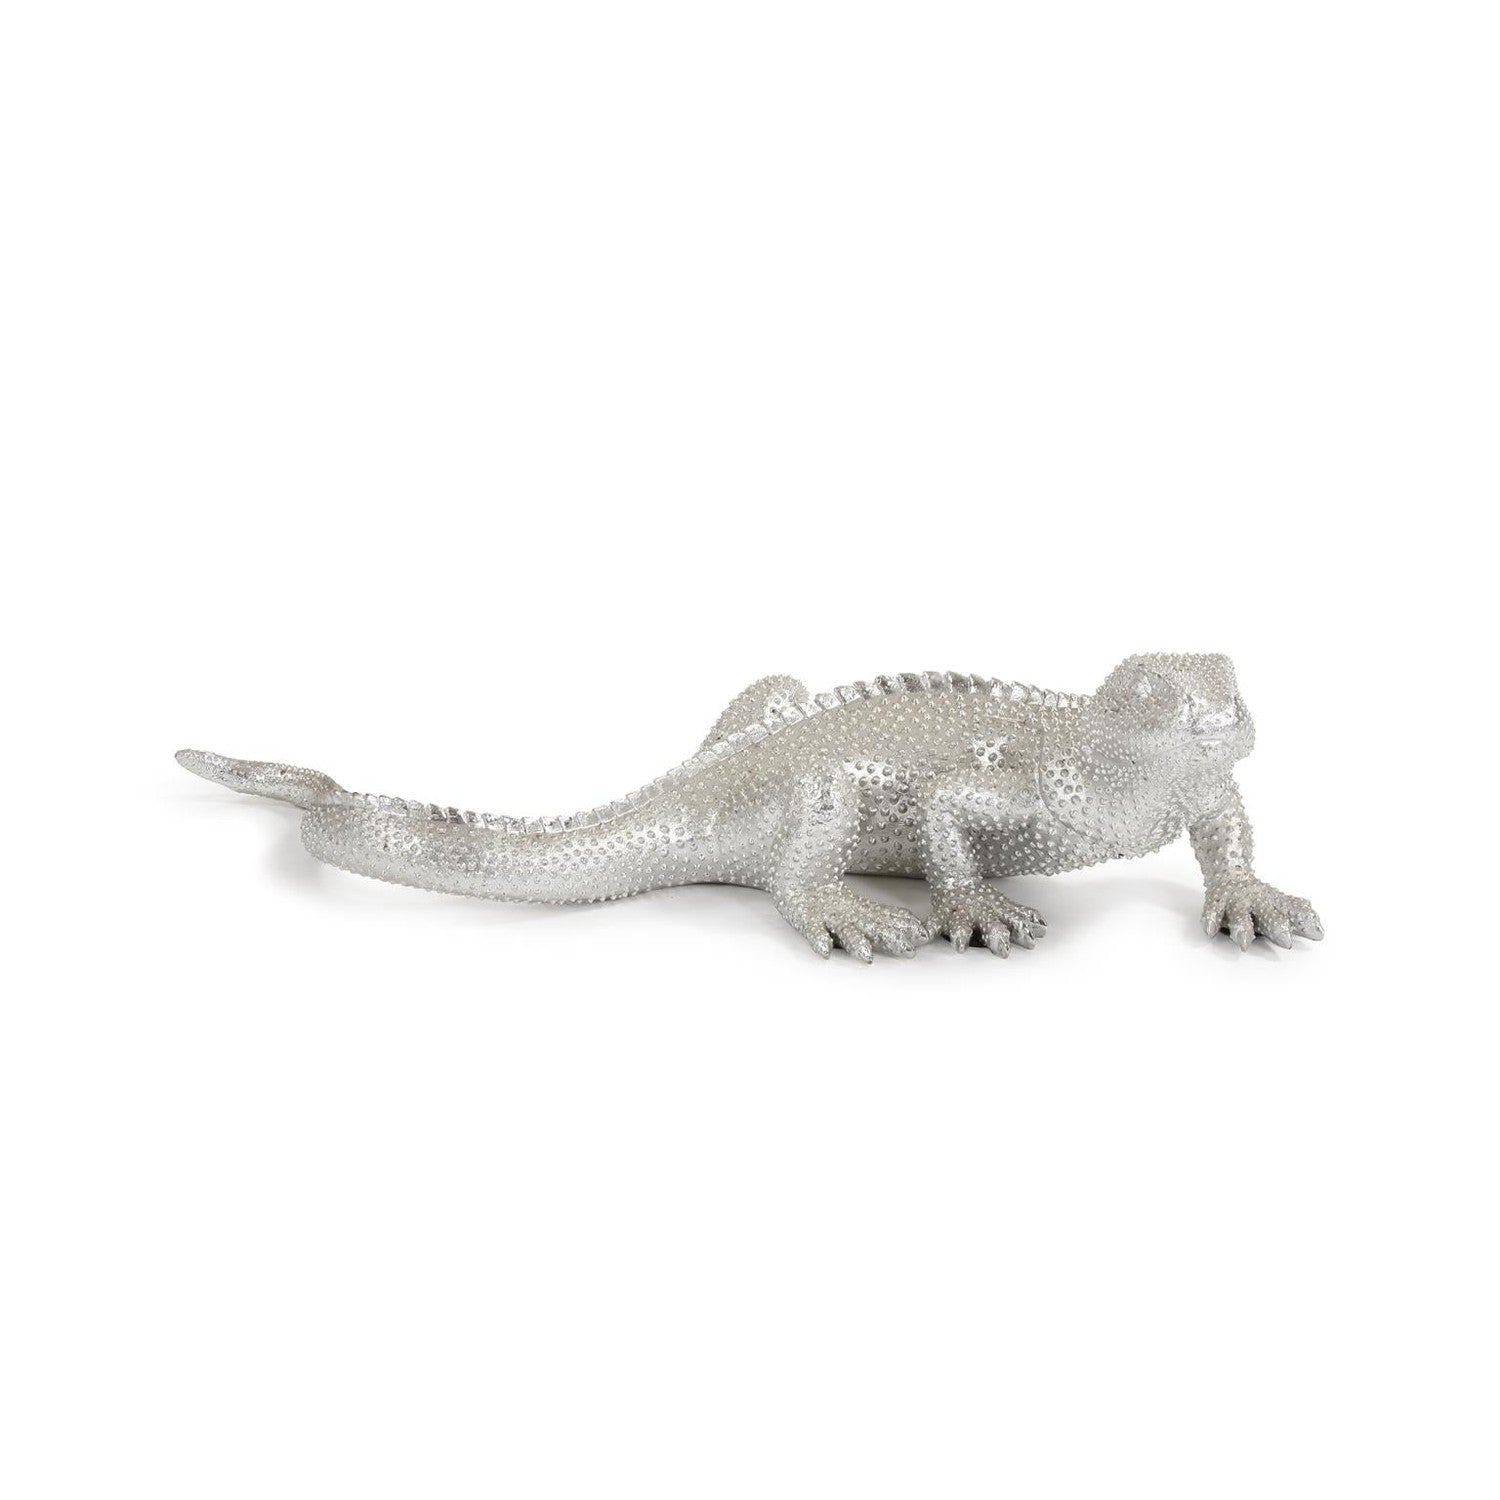 Bright Nickel Plated Lizard-The Howard Elliott Collection-HOWARD-12170-Decor-1-France and Son